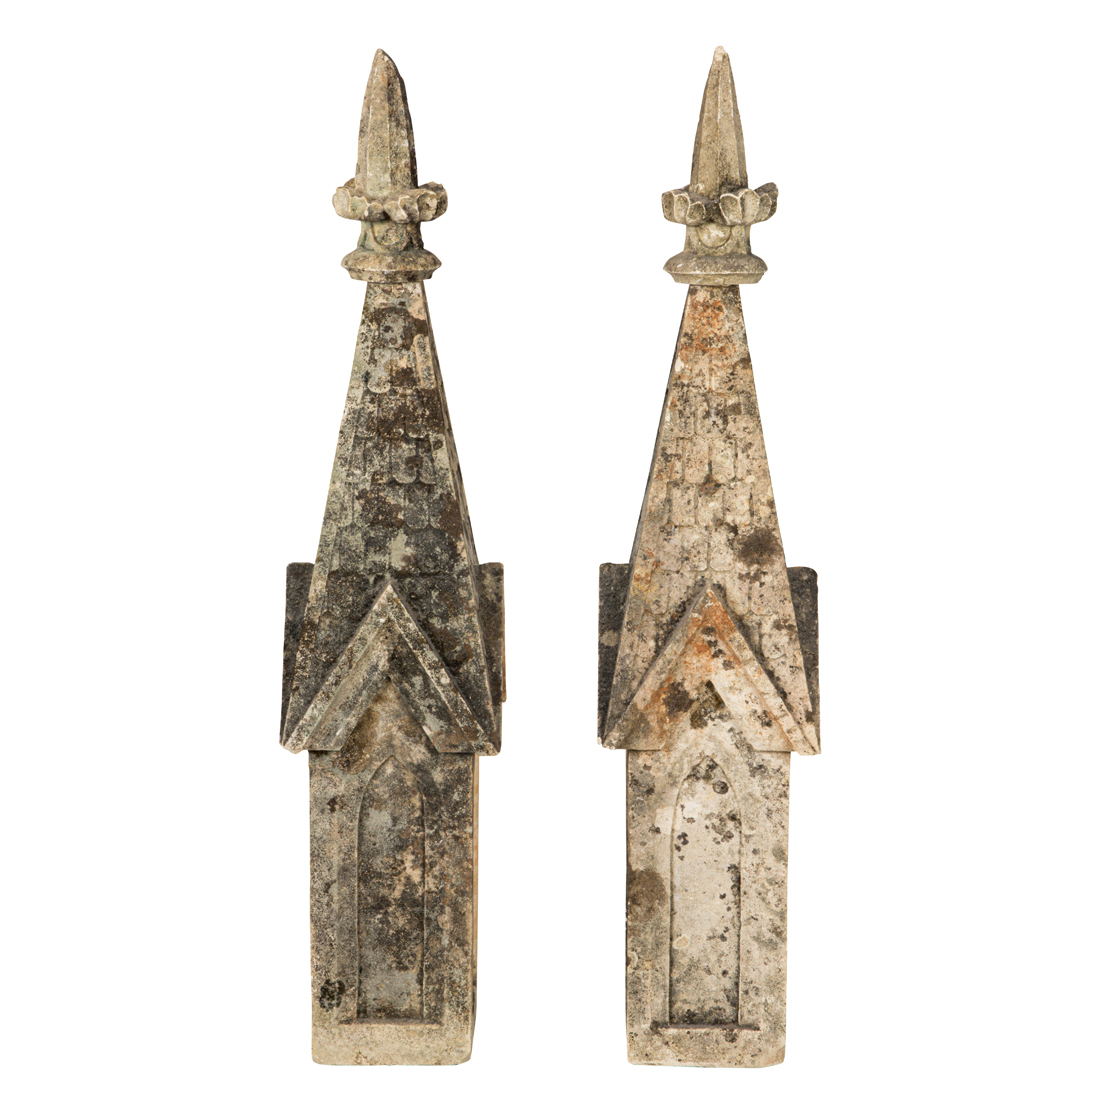 A PAIR OF GOTHIC STYLE CARVED STONE